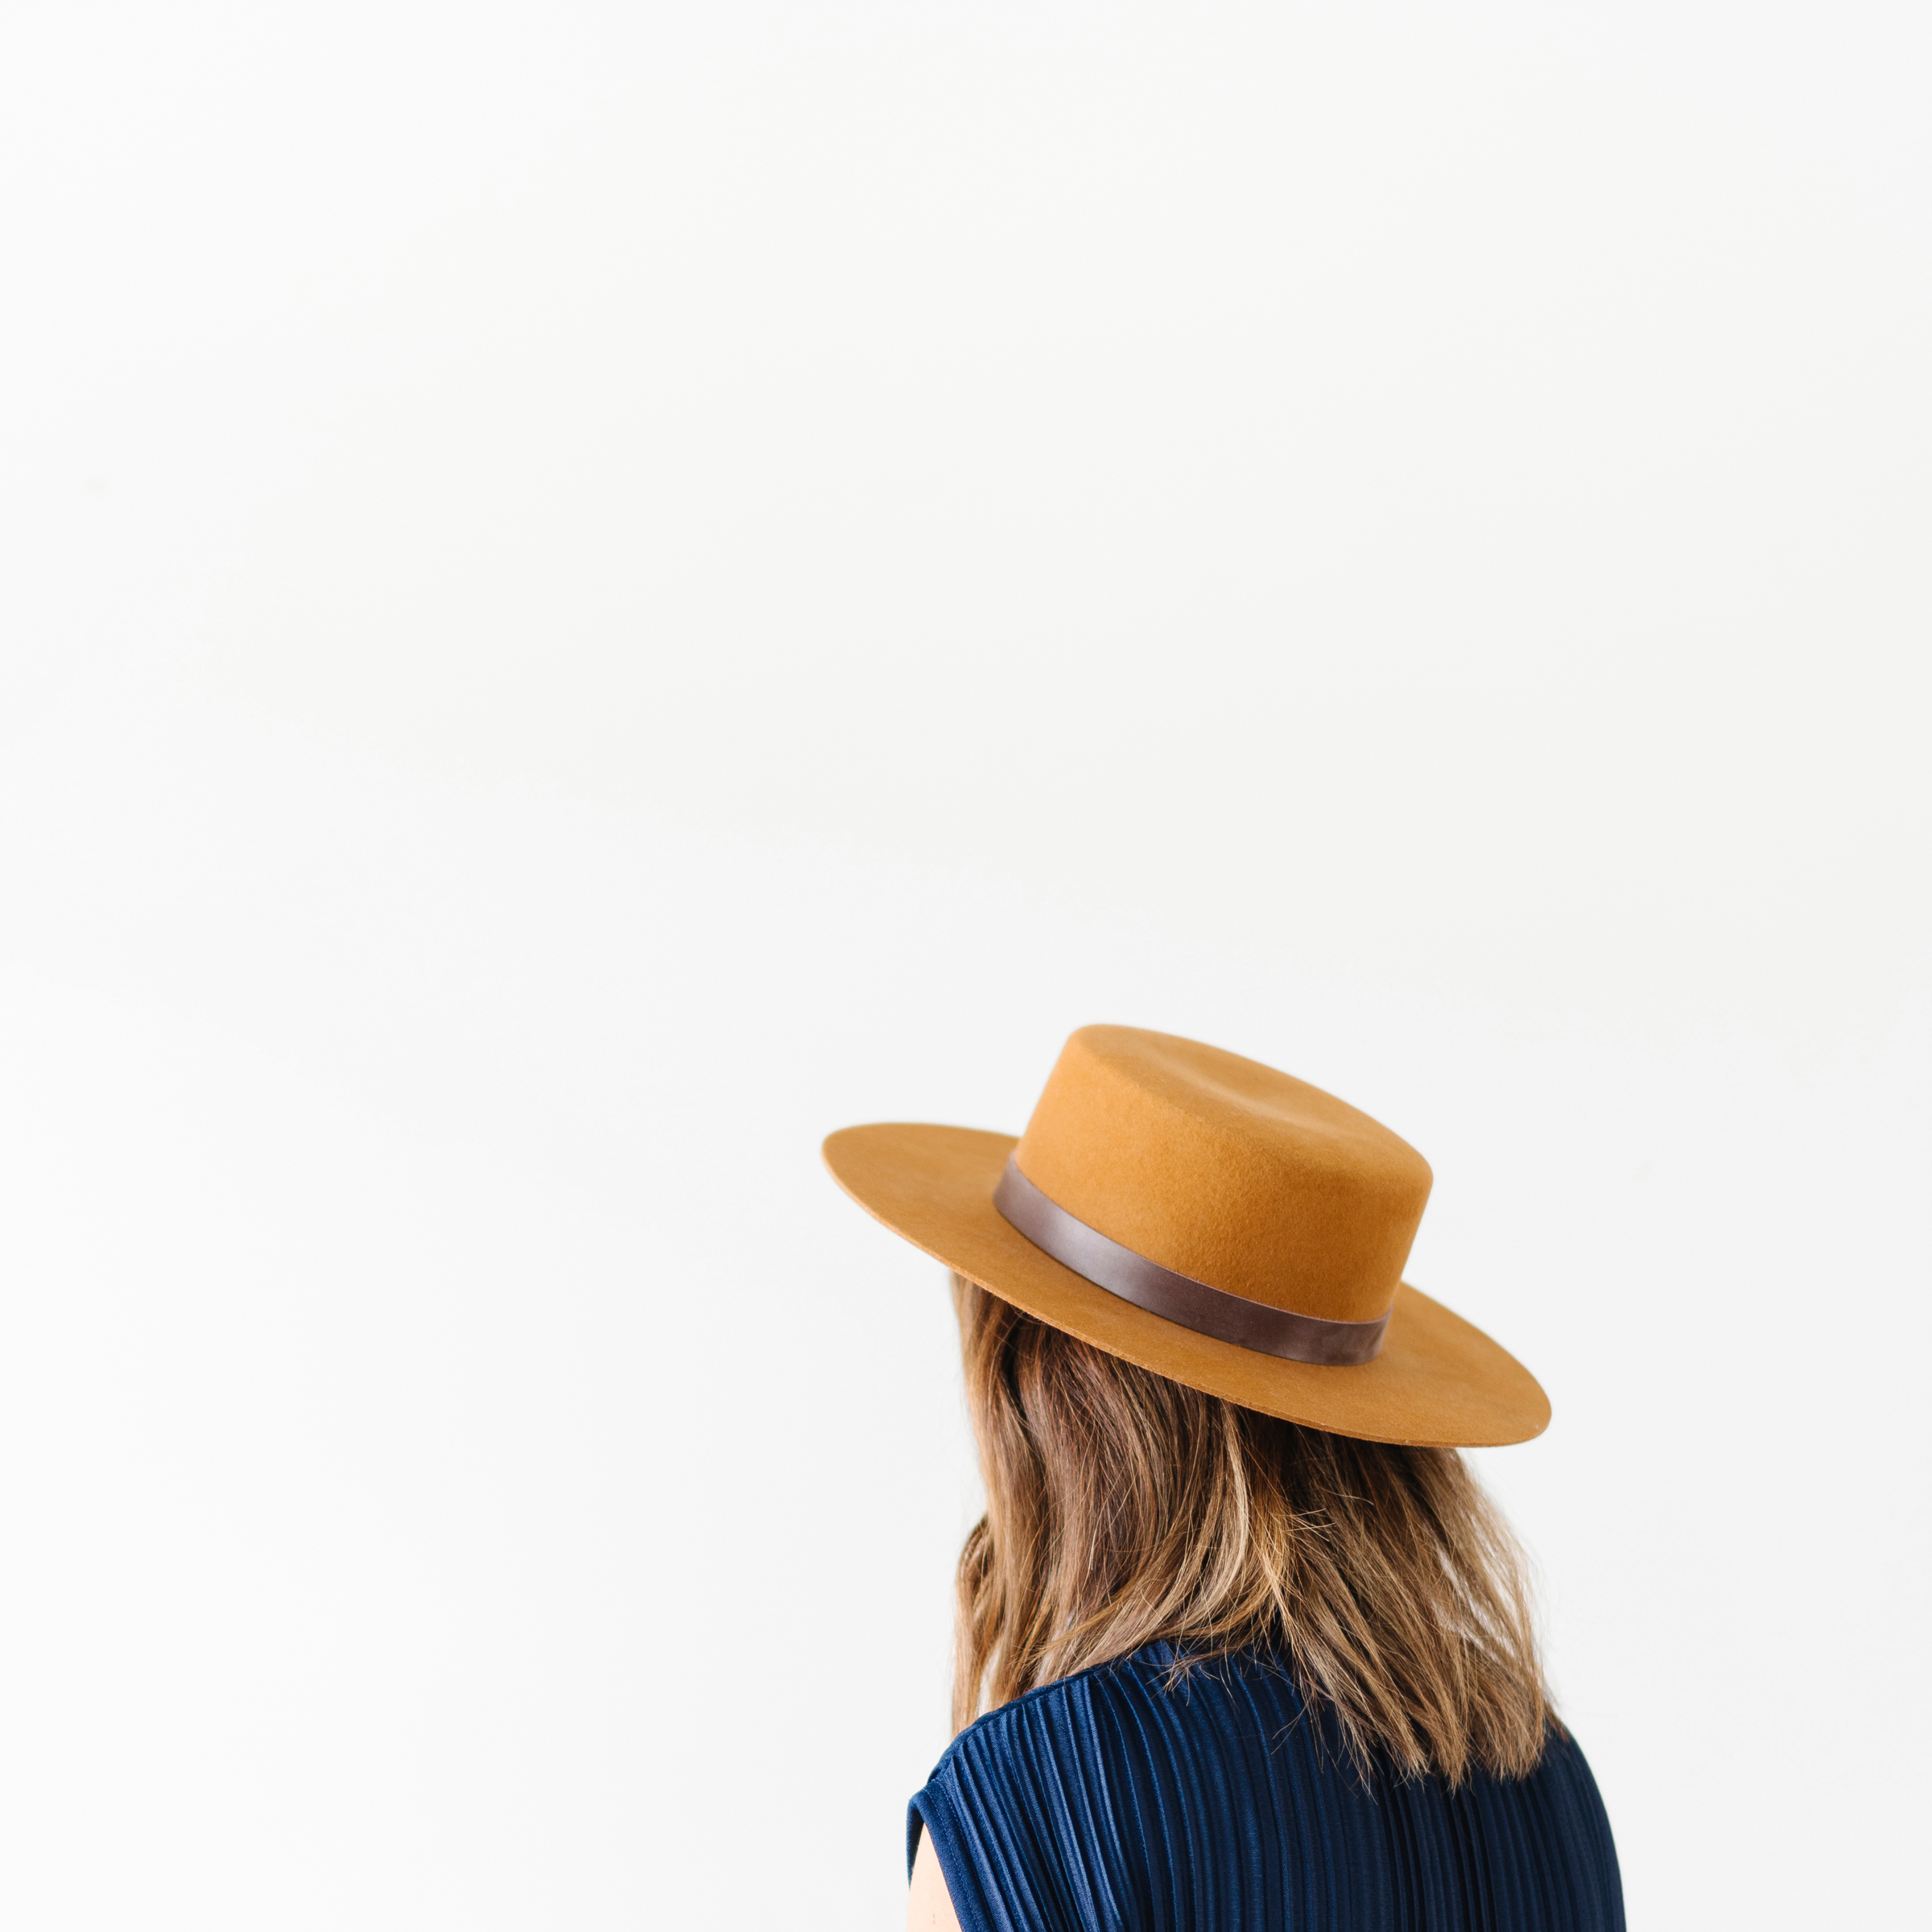 This image shoes a woman facing away from the camera, with a hat on. Michele Cushatt talks about 10 practices to build up your faith.